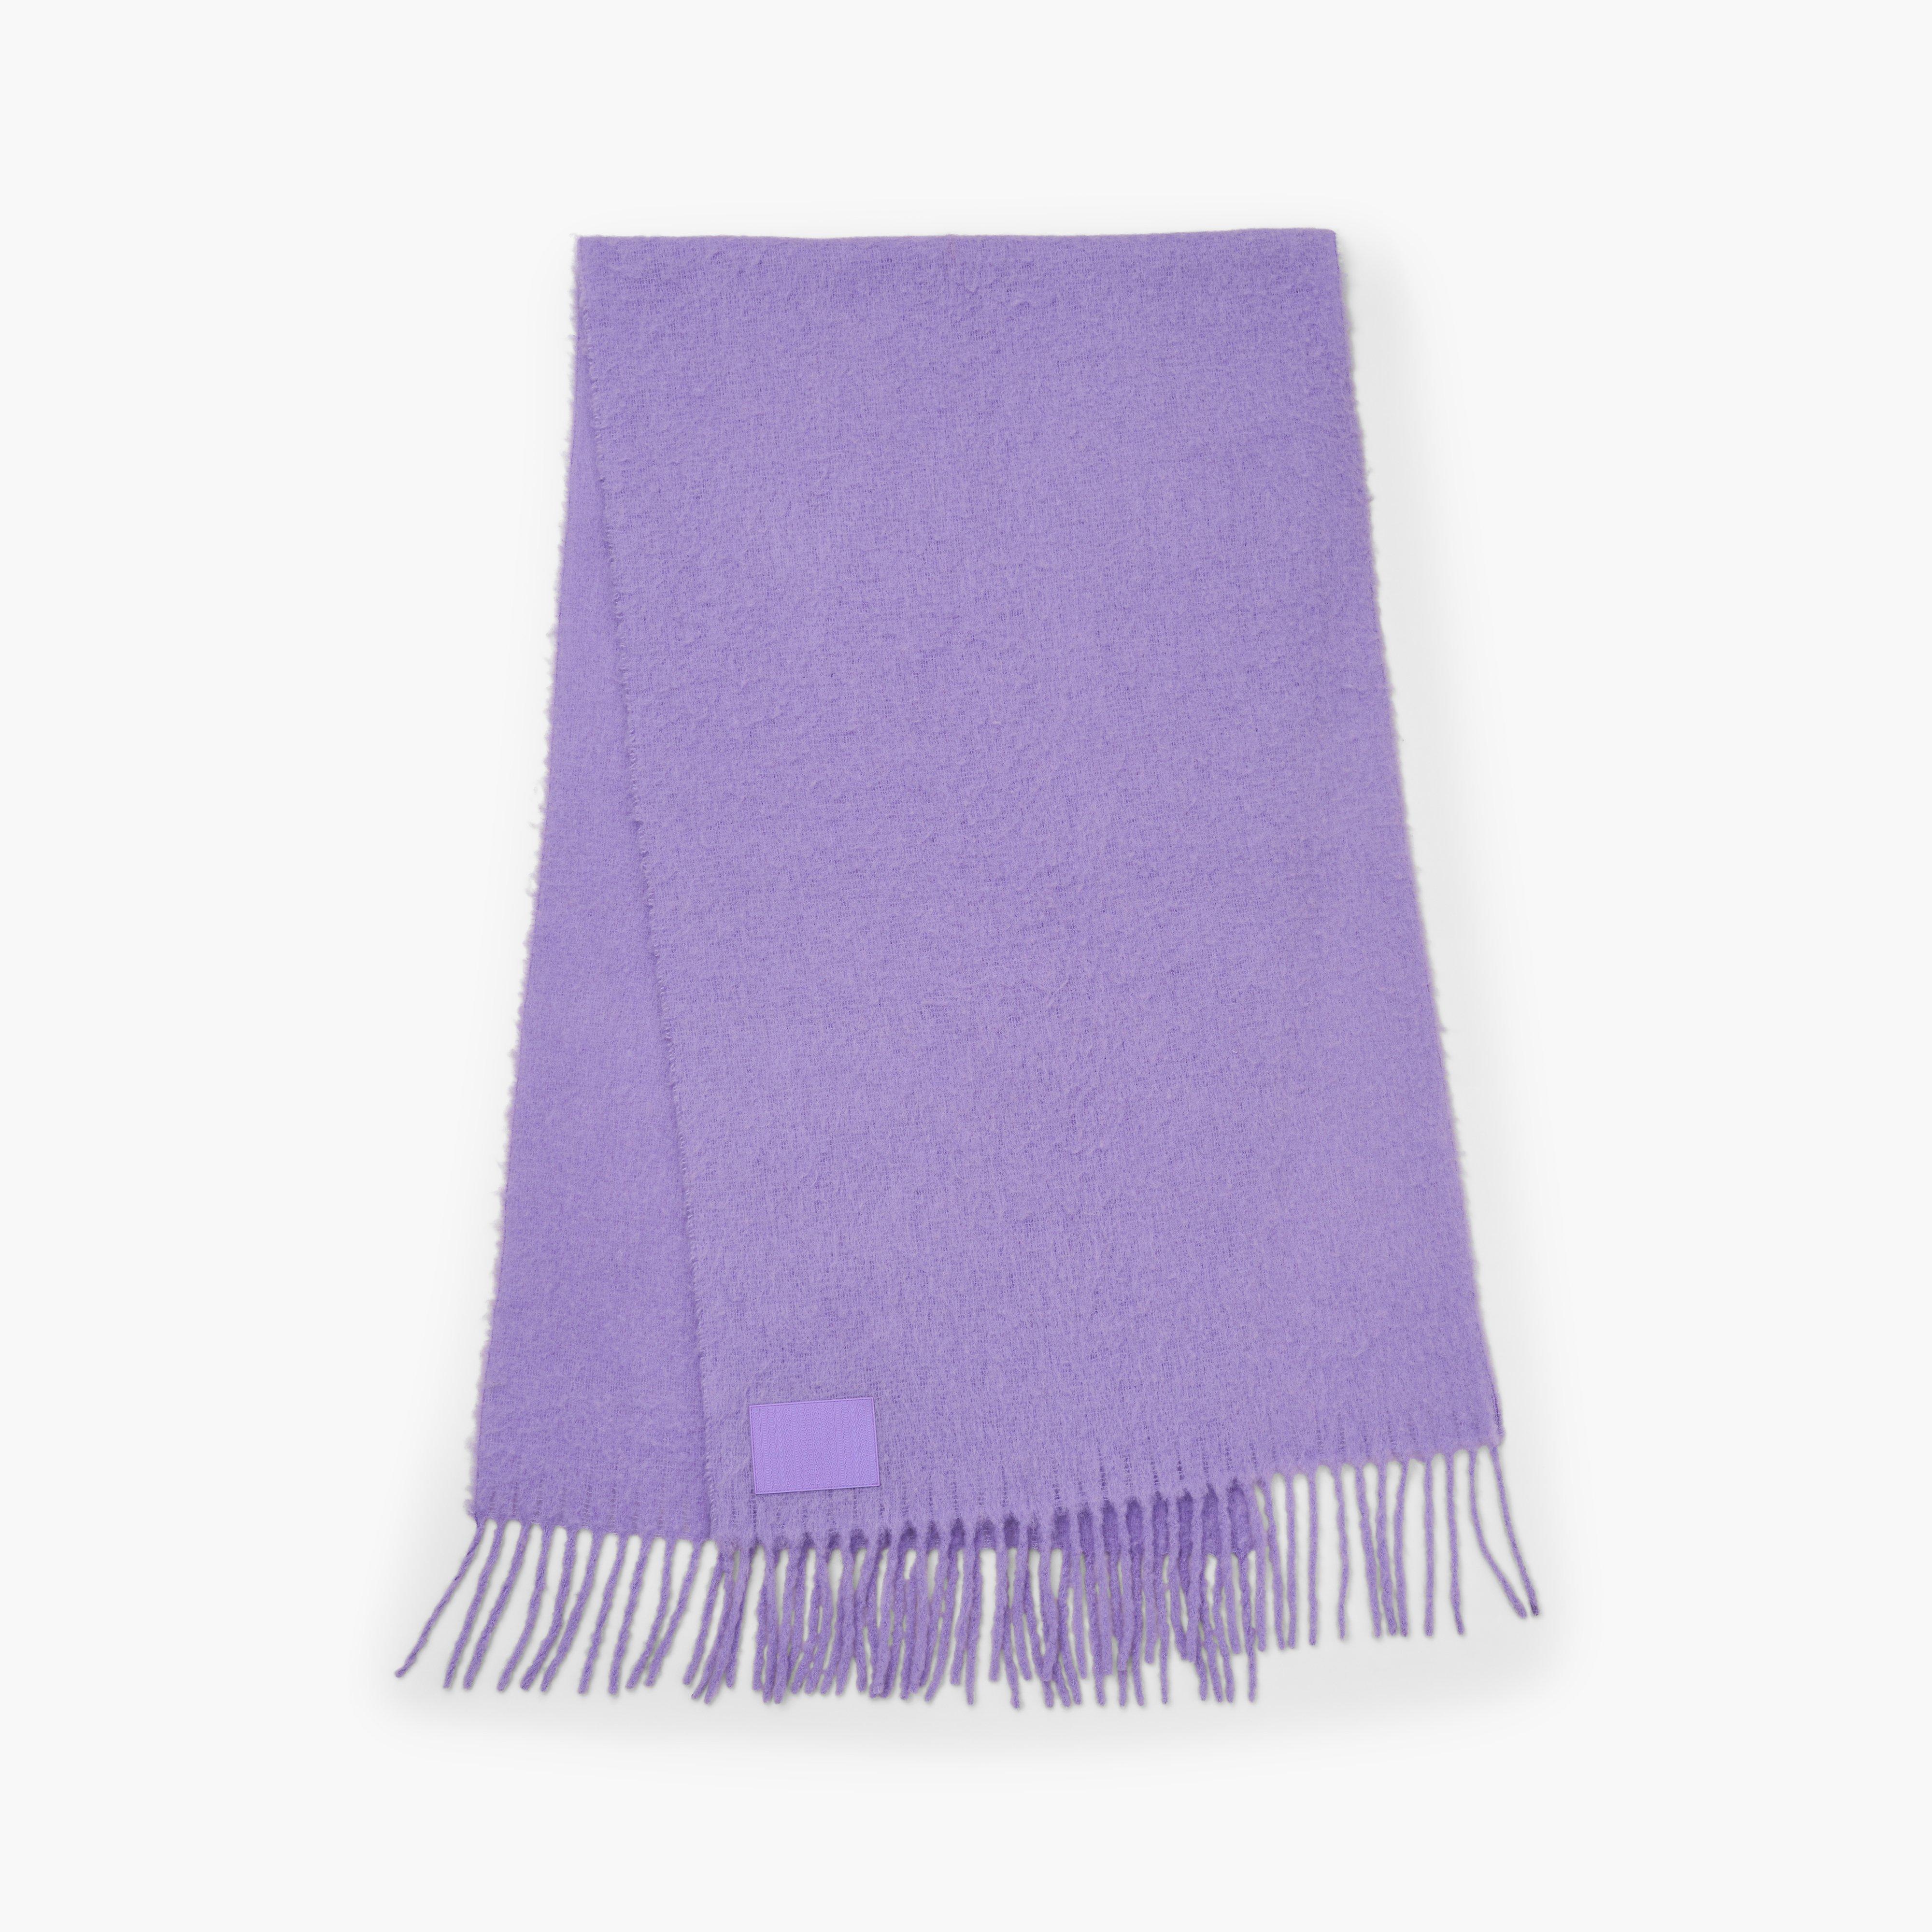 Marc by Marc jacobs The Cloud Scarf,ICED LAVENDER